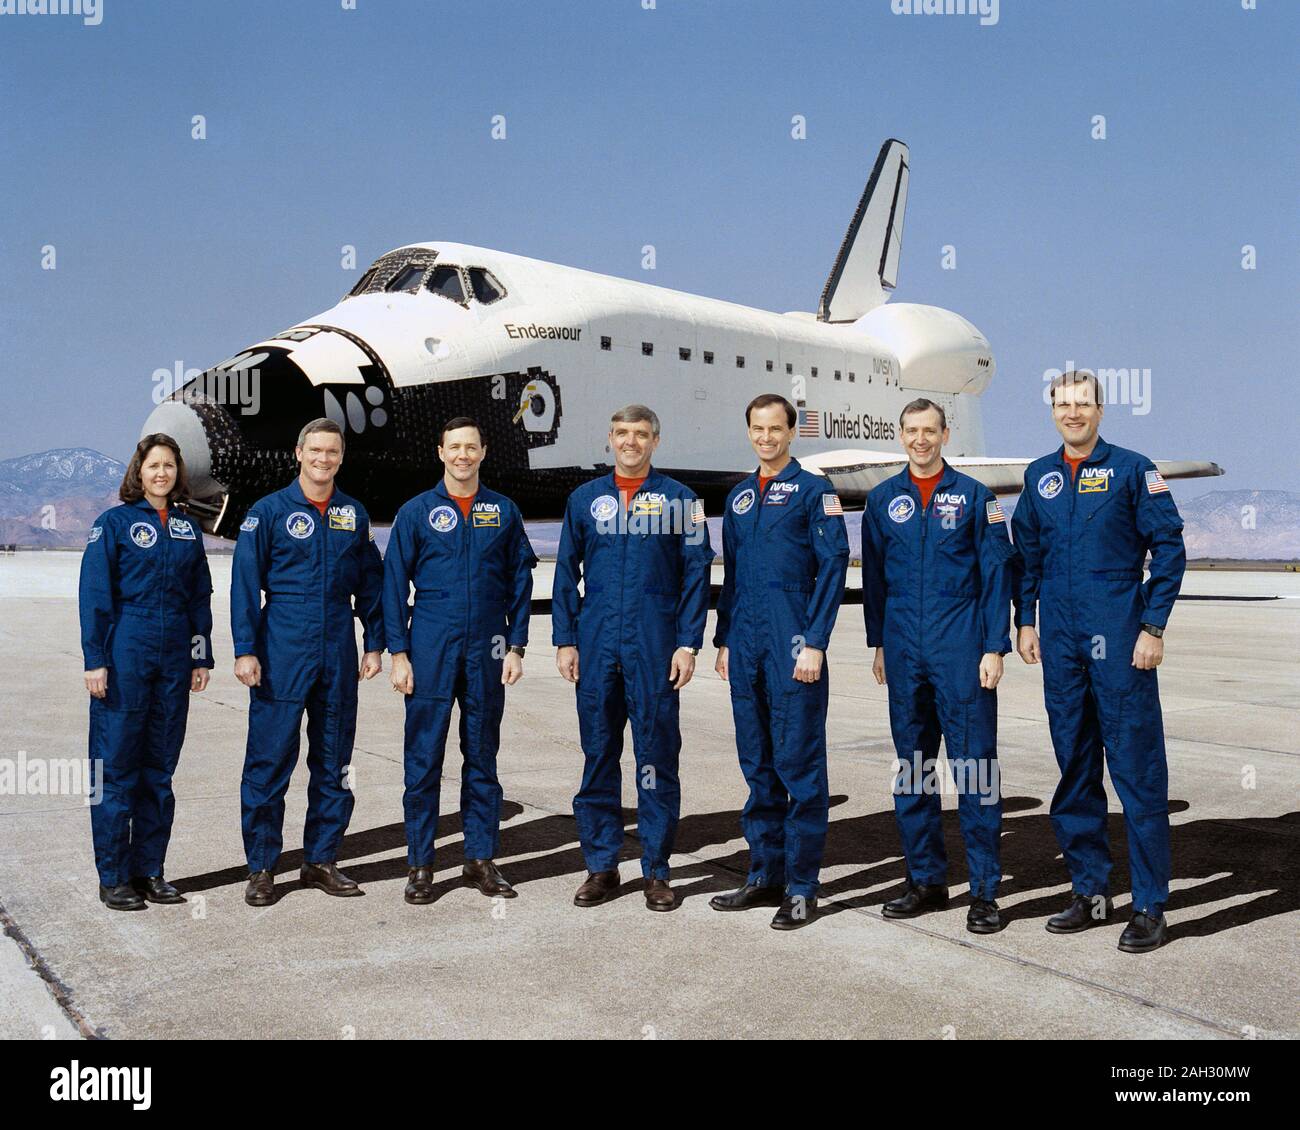 (16 Jan. 1992) --- These seven NASA astronauts are currently training for the first flight of the Space Shuttle Endeavour, seen in the background. Daniel C. Brandenstein, center, is mission commander; and Kevin P. Chilton, third from right, is pilot. Mission specialists are, left to right, Kathryn Thornton, Bruce Melnick, Pierre Thout, Thomas Akers and Richard Hieb. Stock Photo